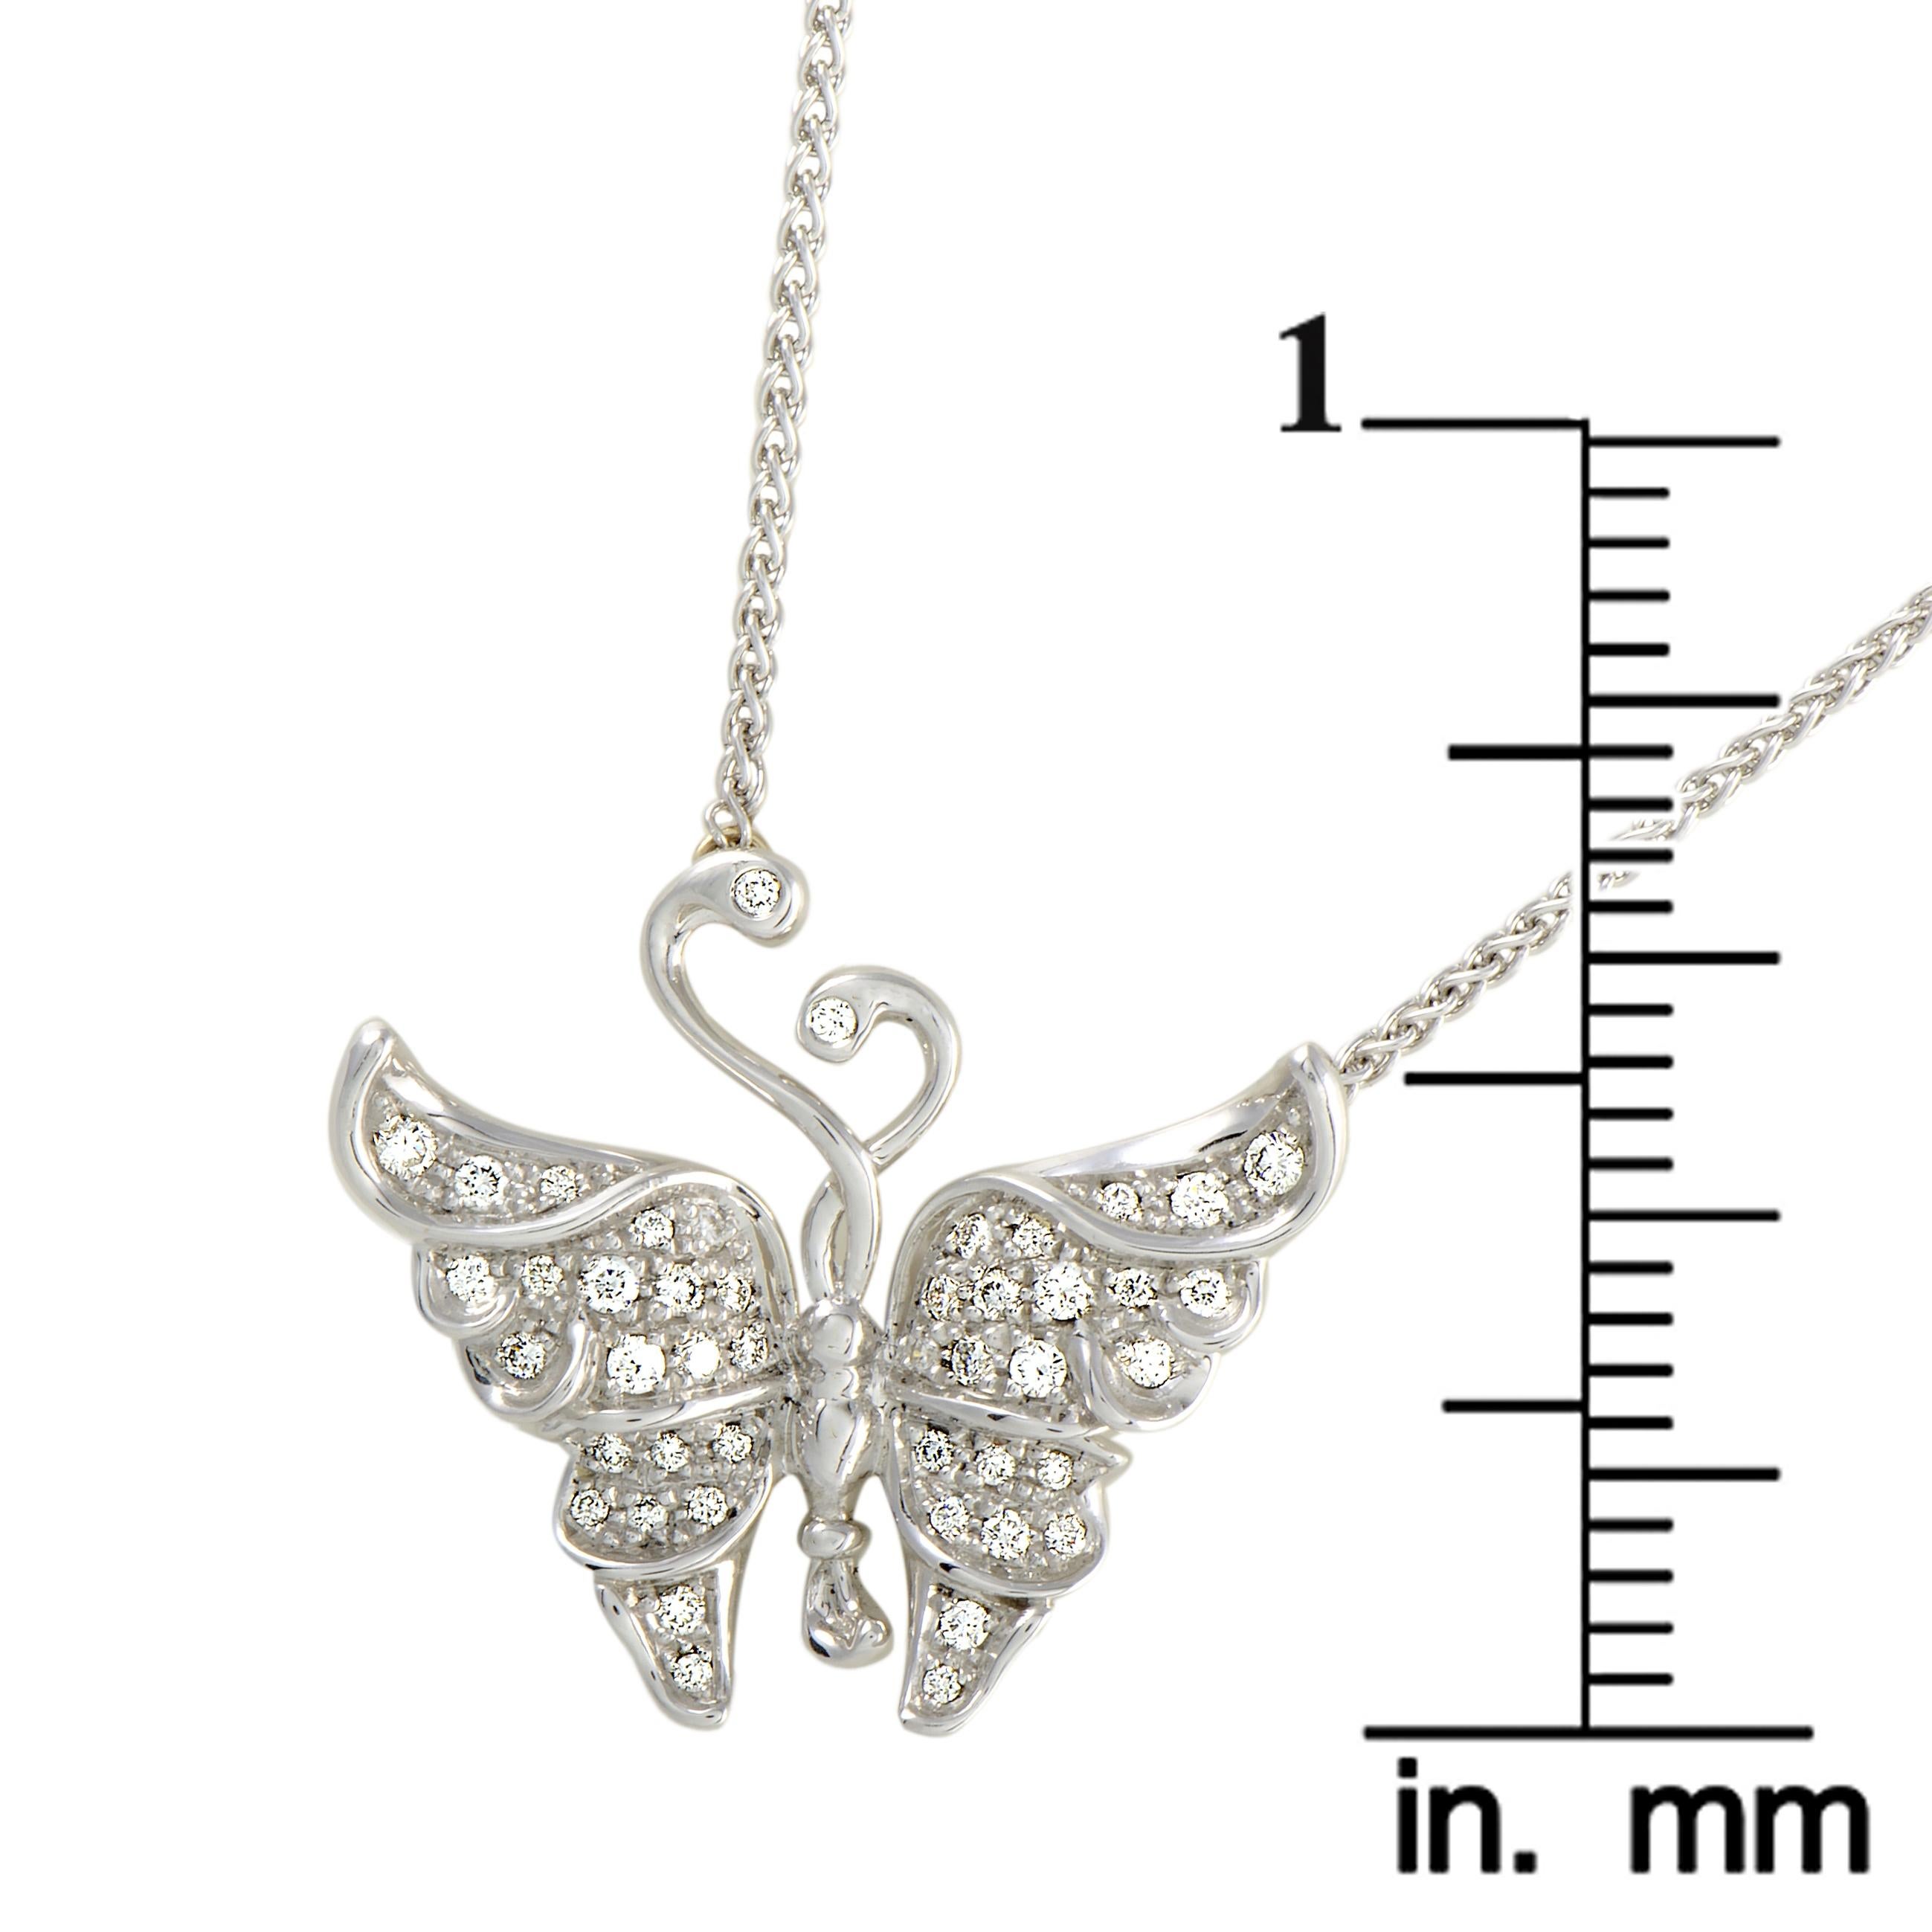 Women's Carrera y Carrera 18K White Gold and 0.37 Ct Diamond Butterfly Pendant Necklace